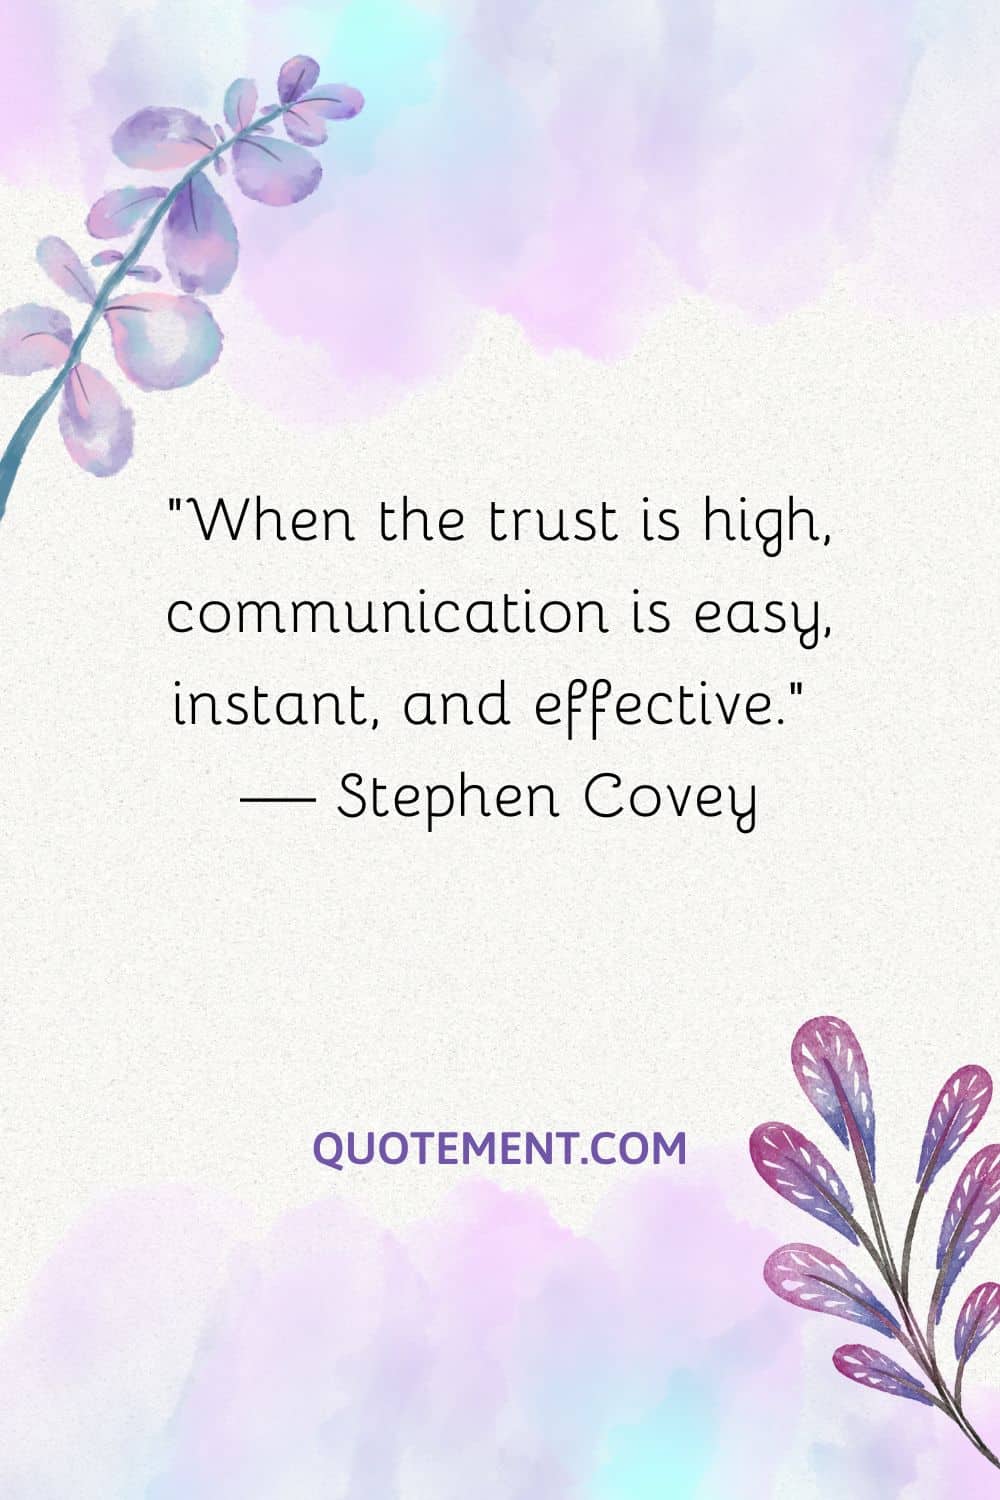 When the trust is high, communication is easy, instant, and effective